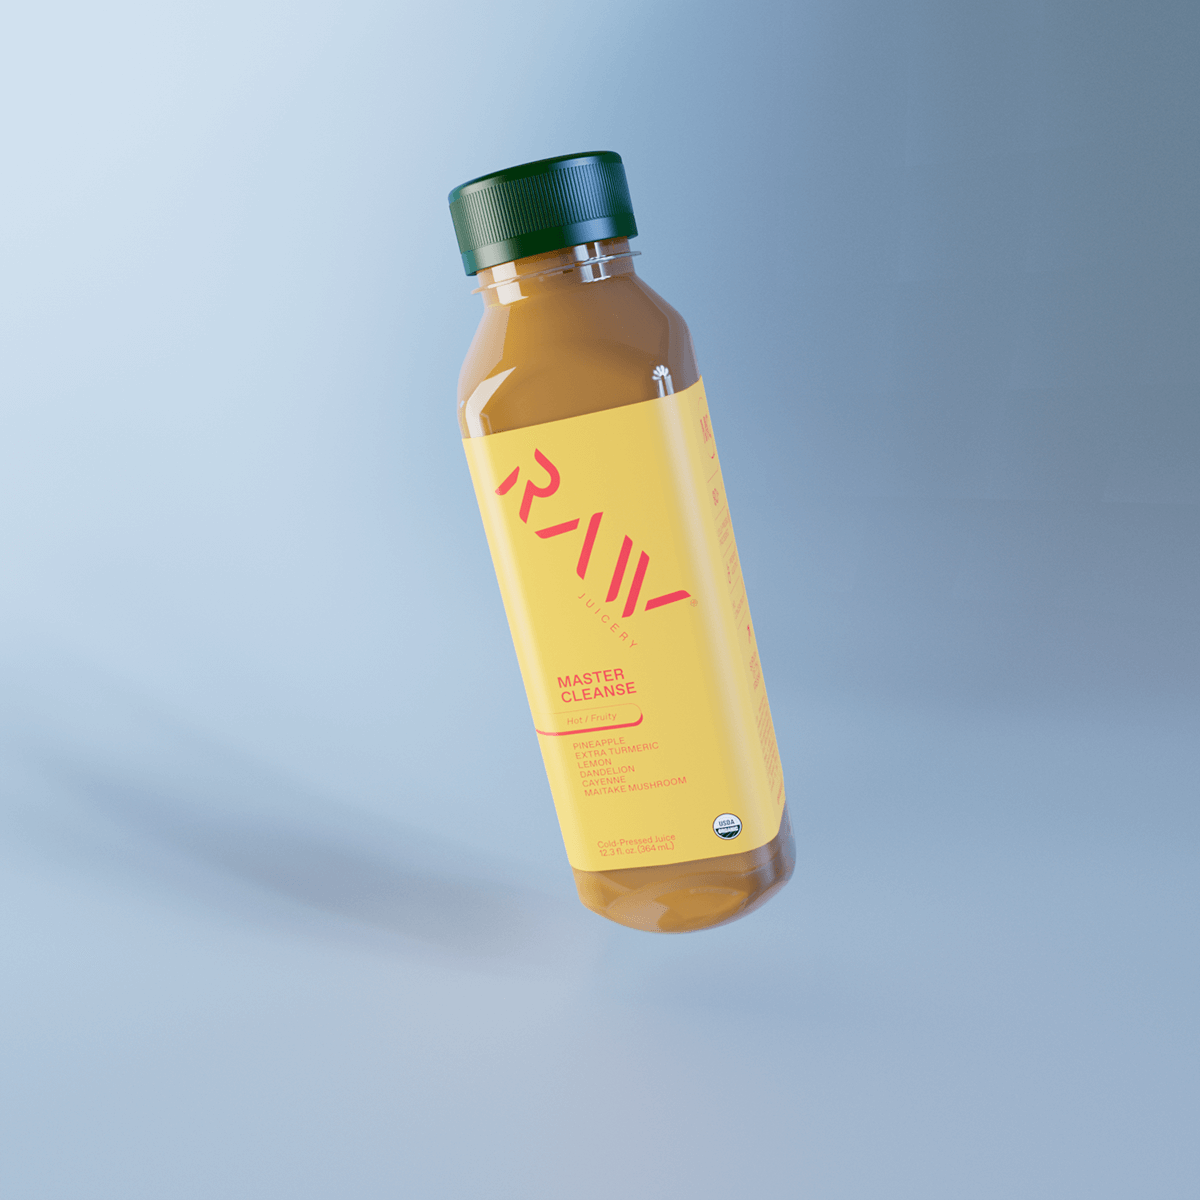 MASTER CLEANSE - Raw Juicery